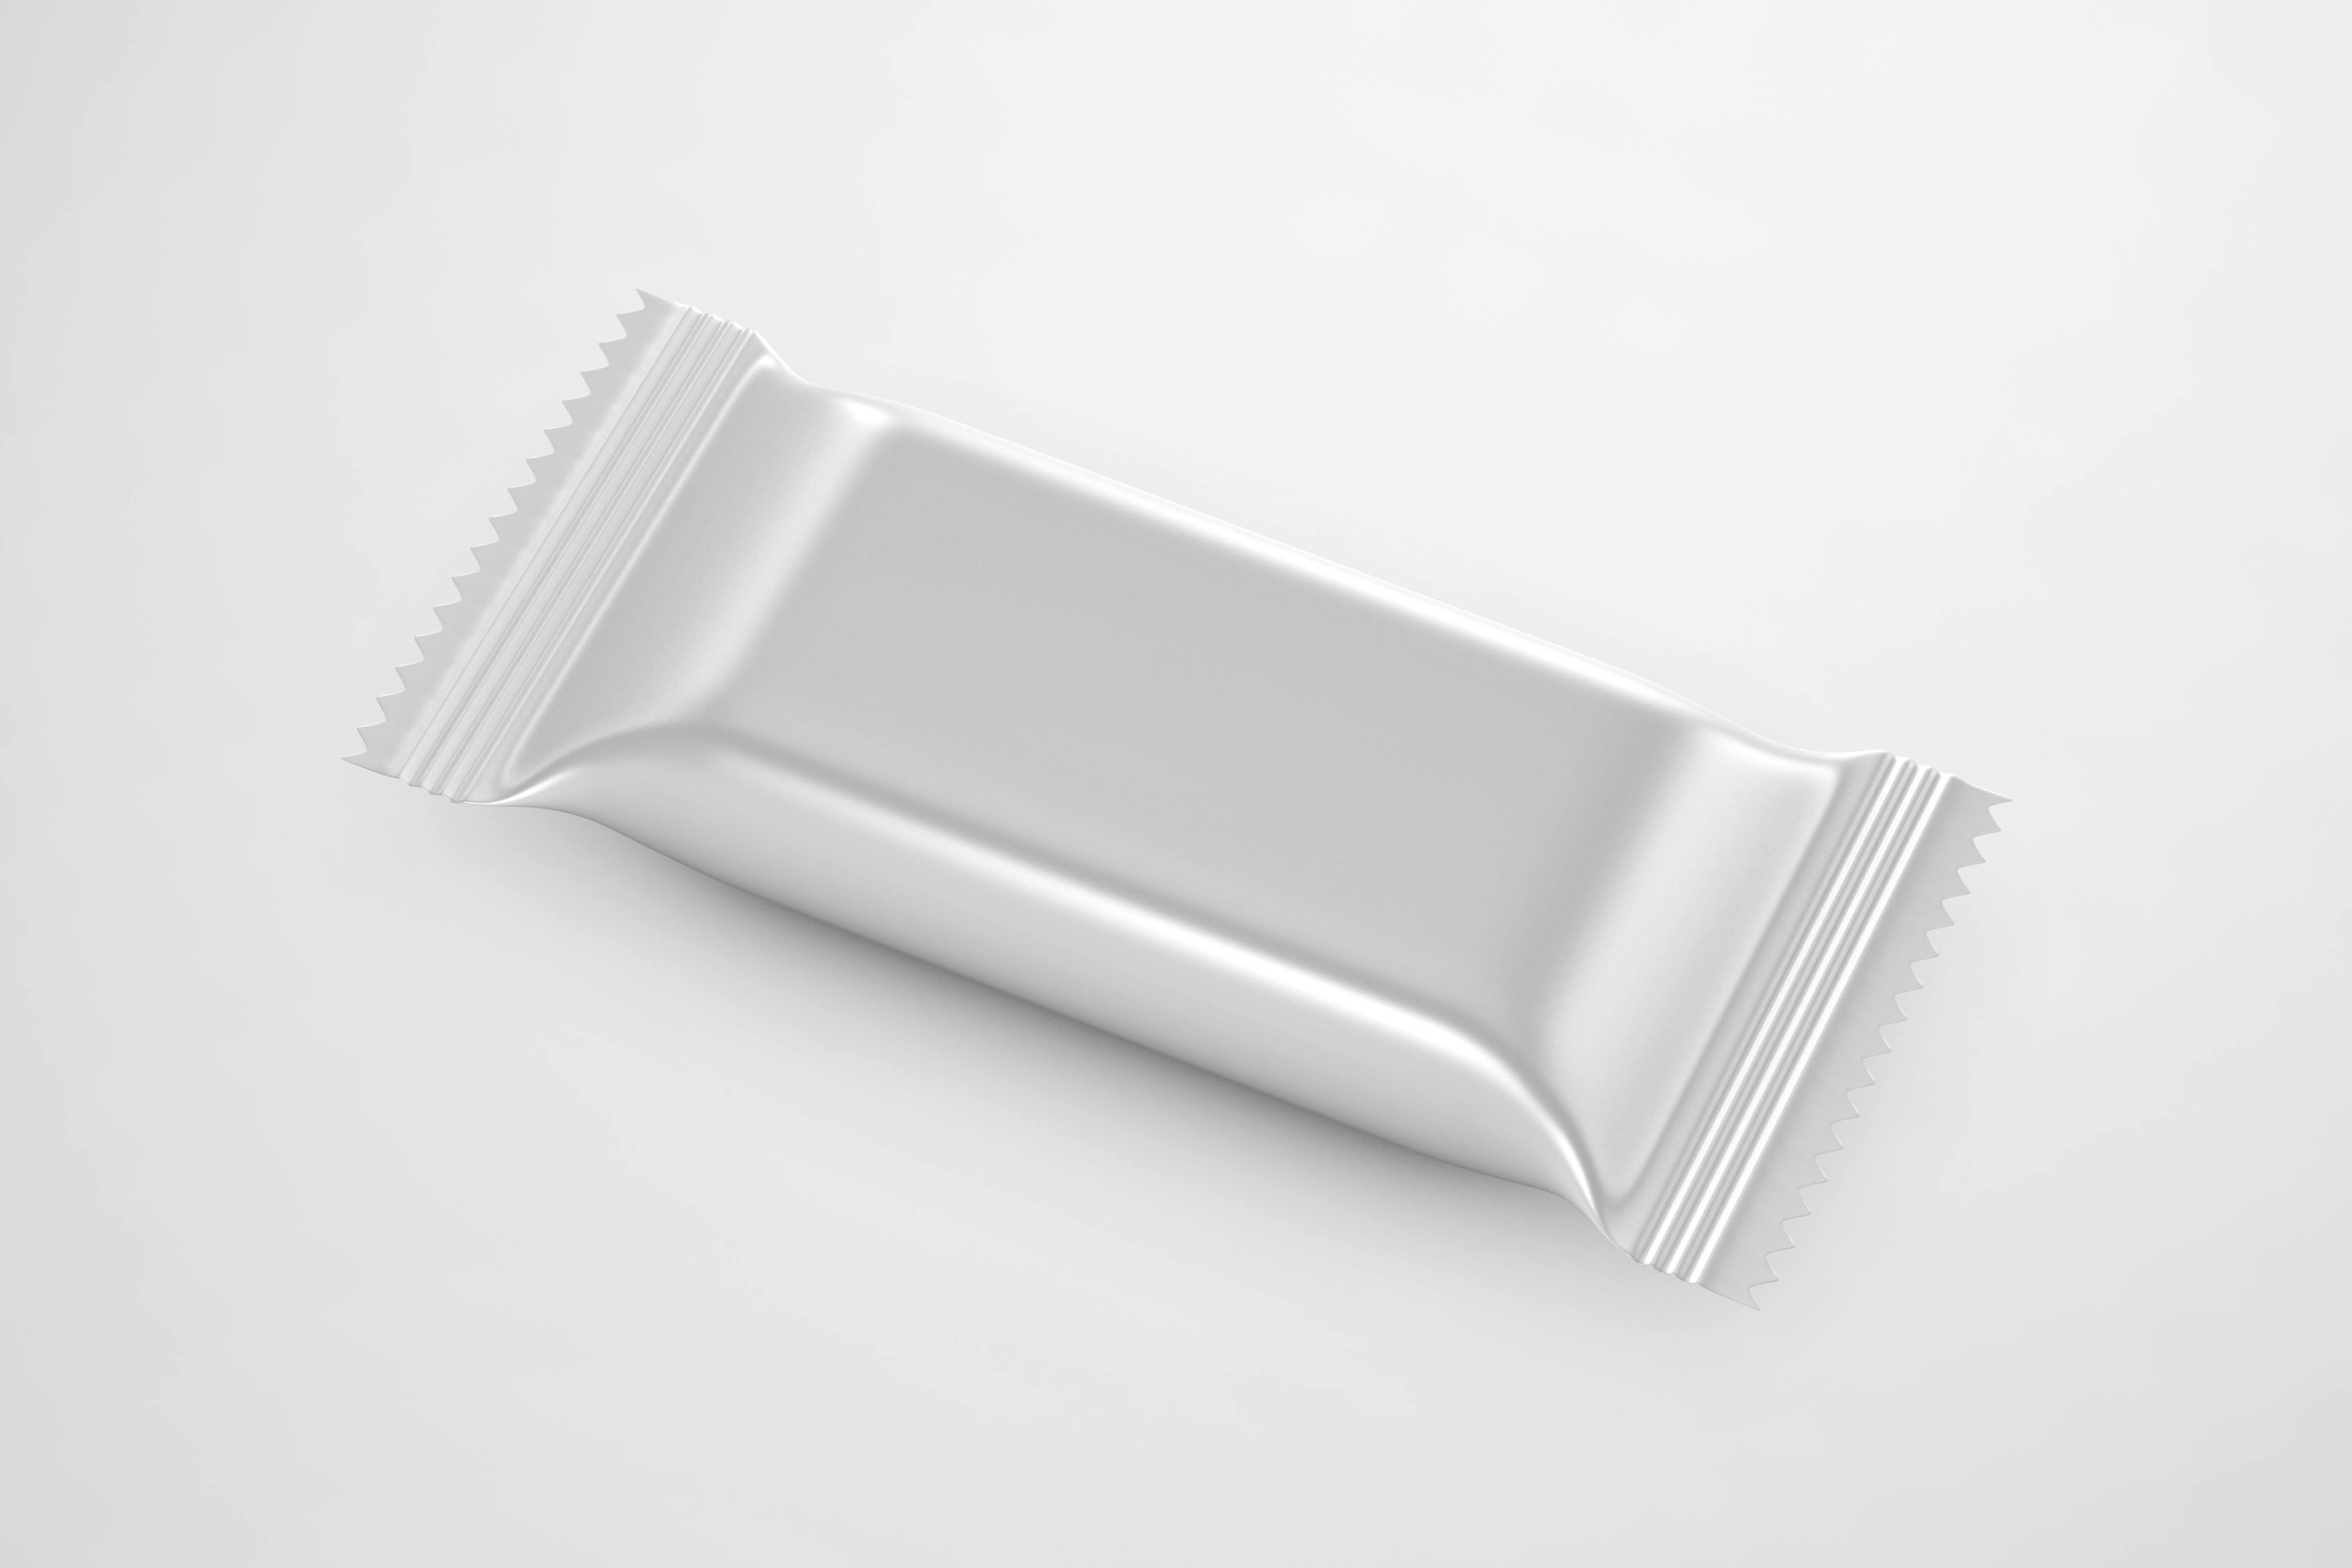 White Plastic Pack on White Surface · Free Stock Photo